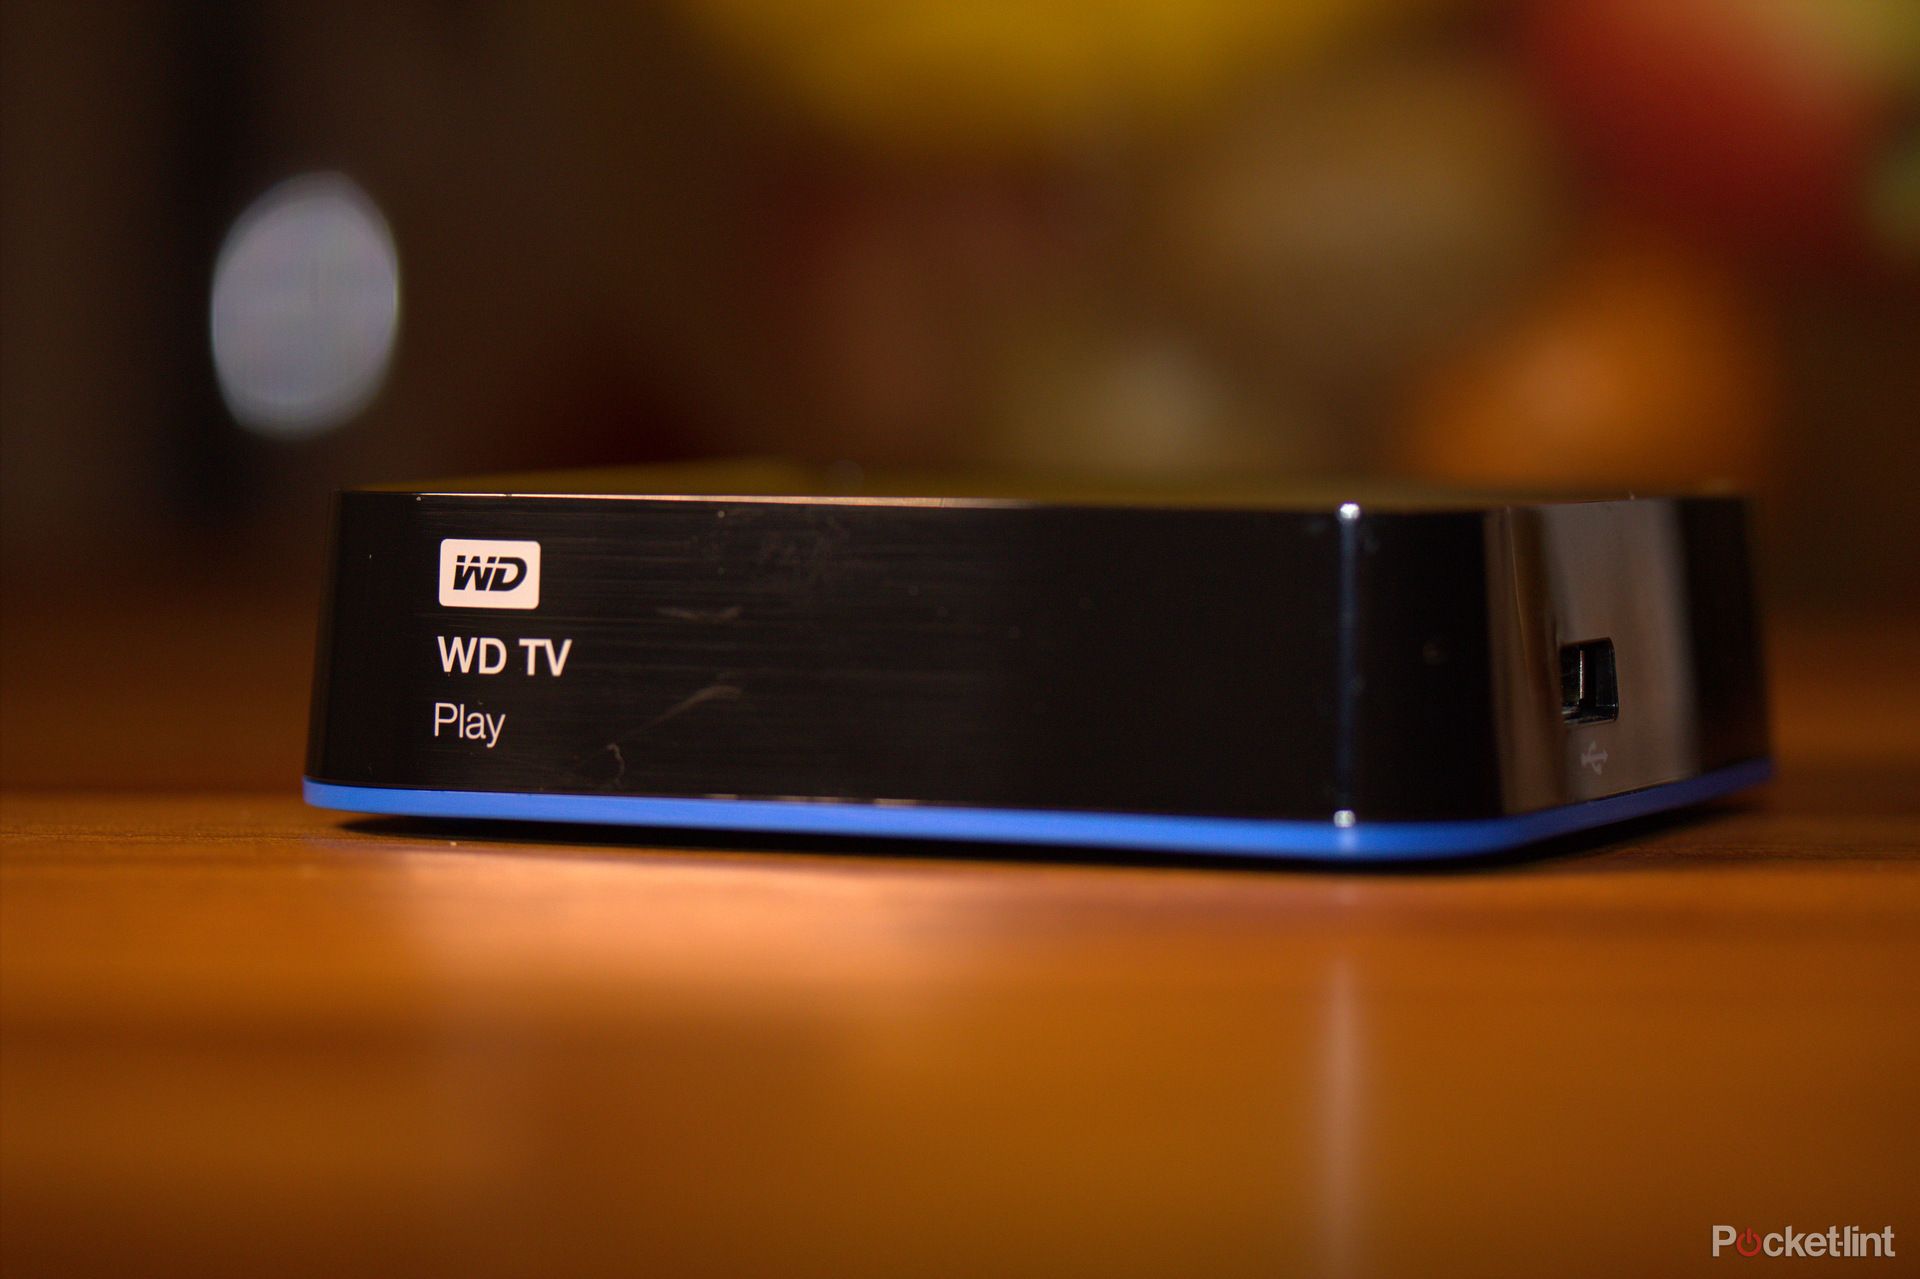 western digital wd tv play review image 1